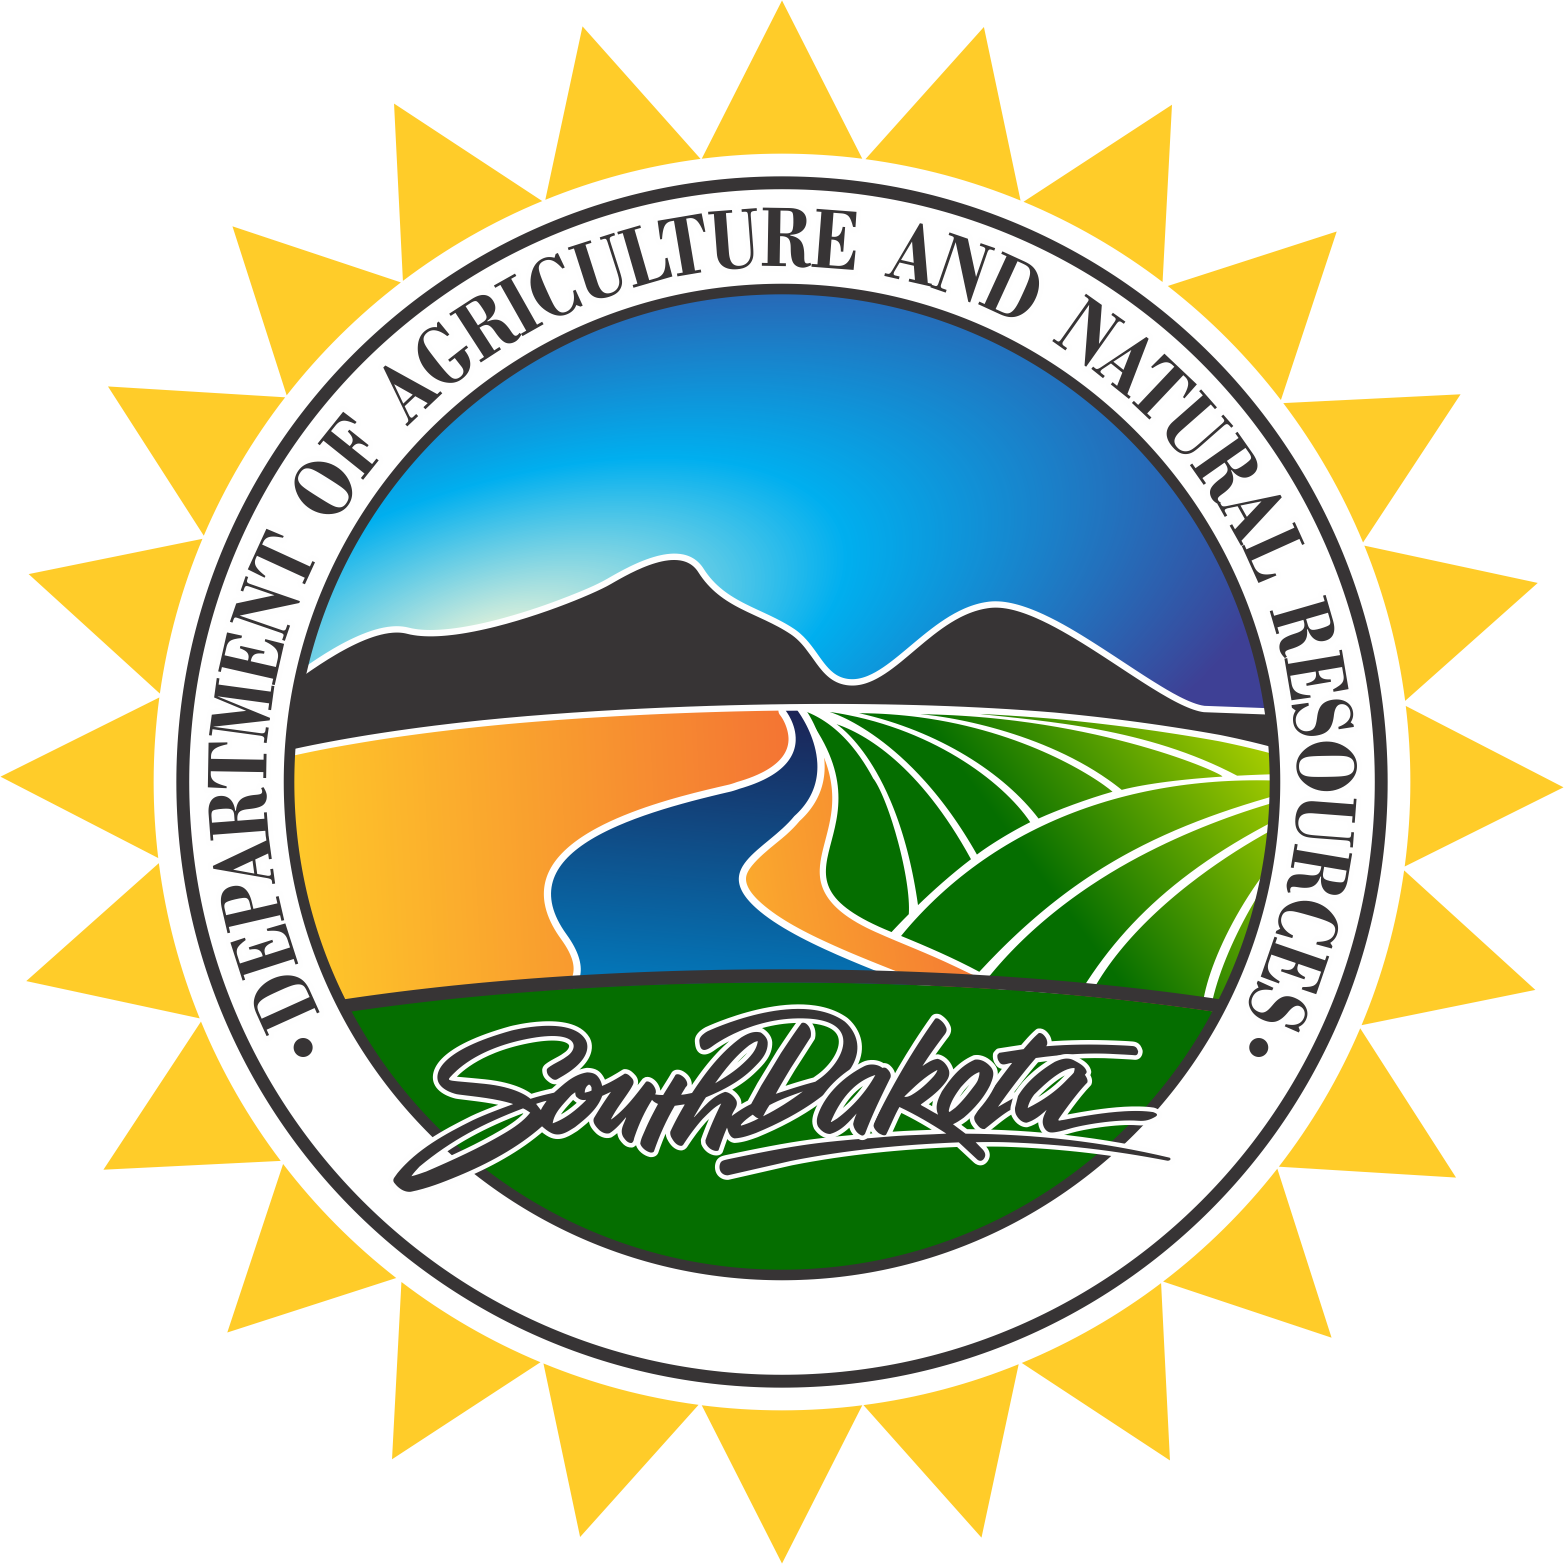 department of environment and natural resources logo